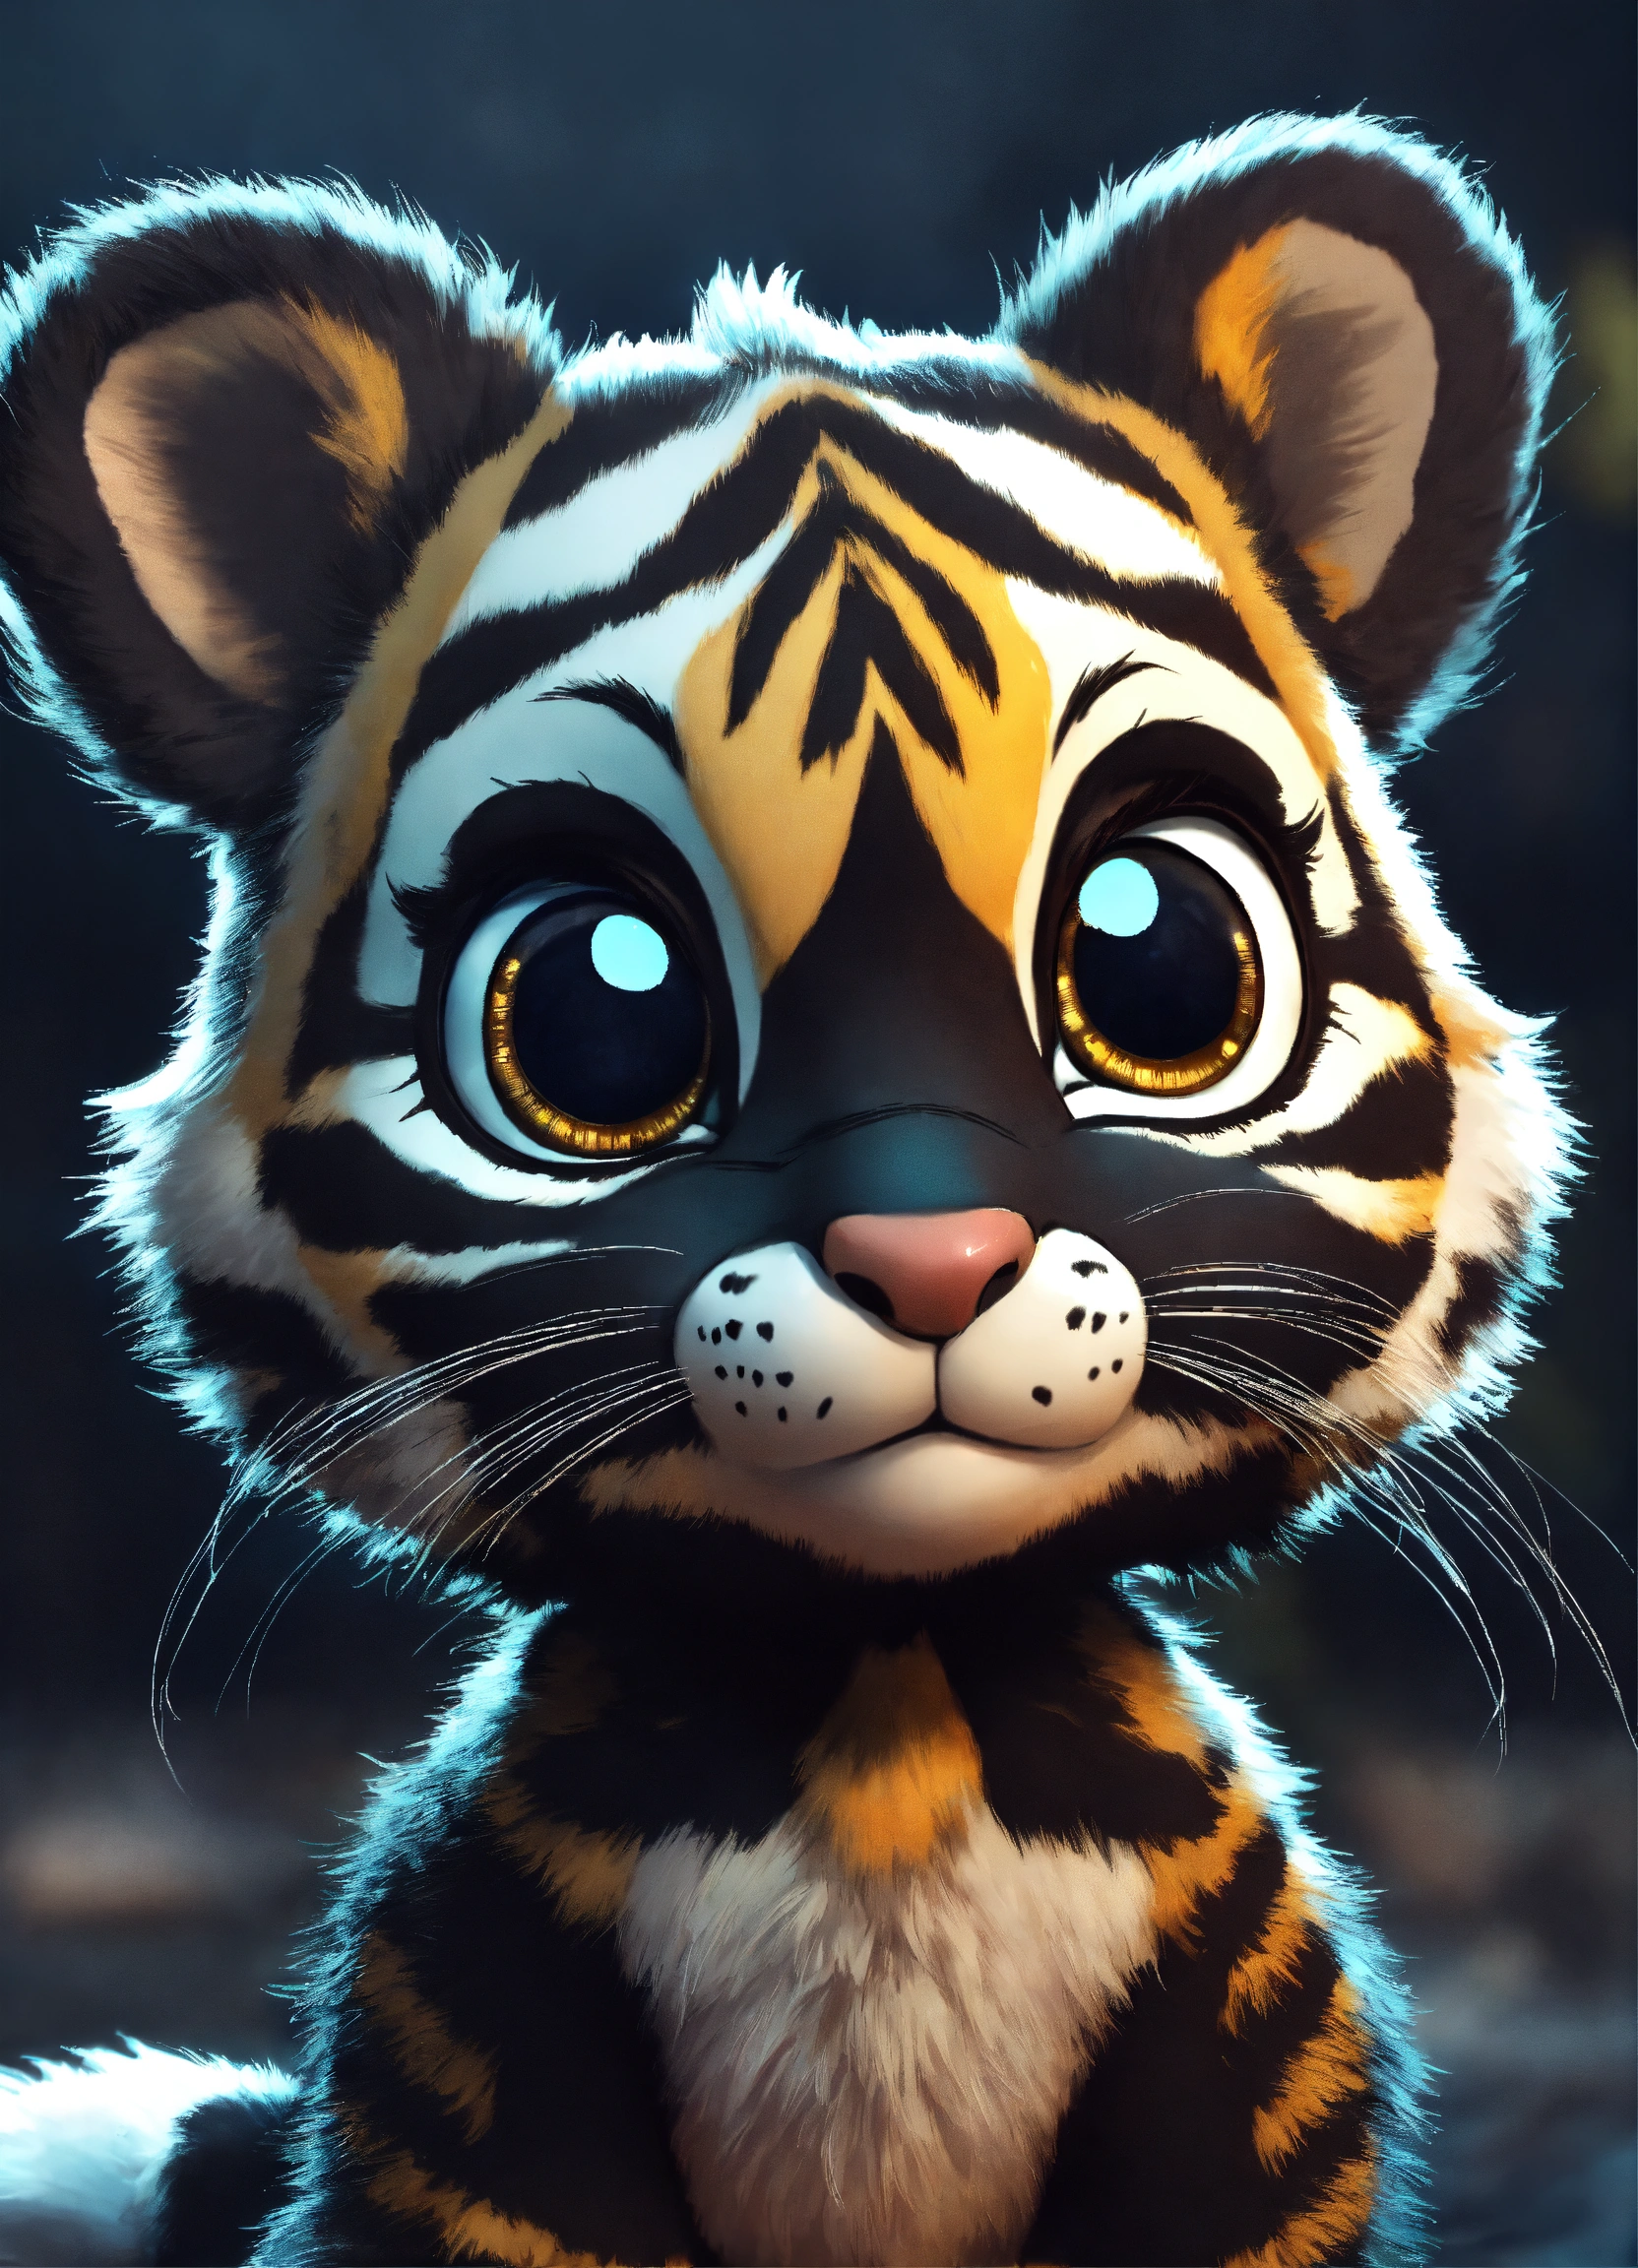 Lexica - A cute black baby tiger with big eyes, animated, cartoon, unreal.